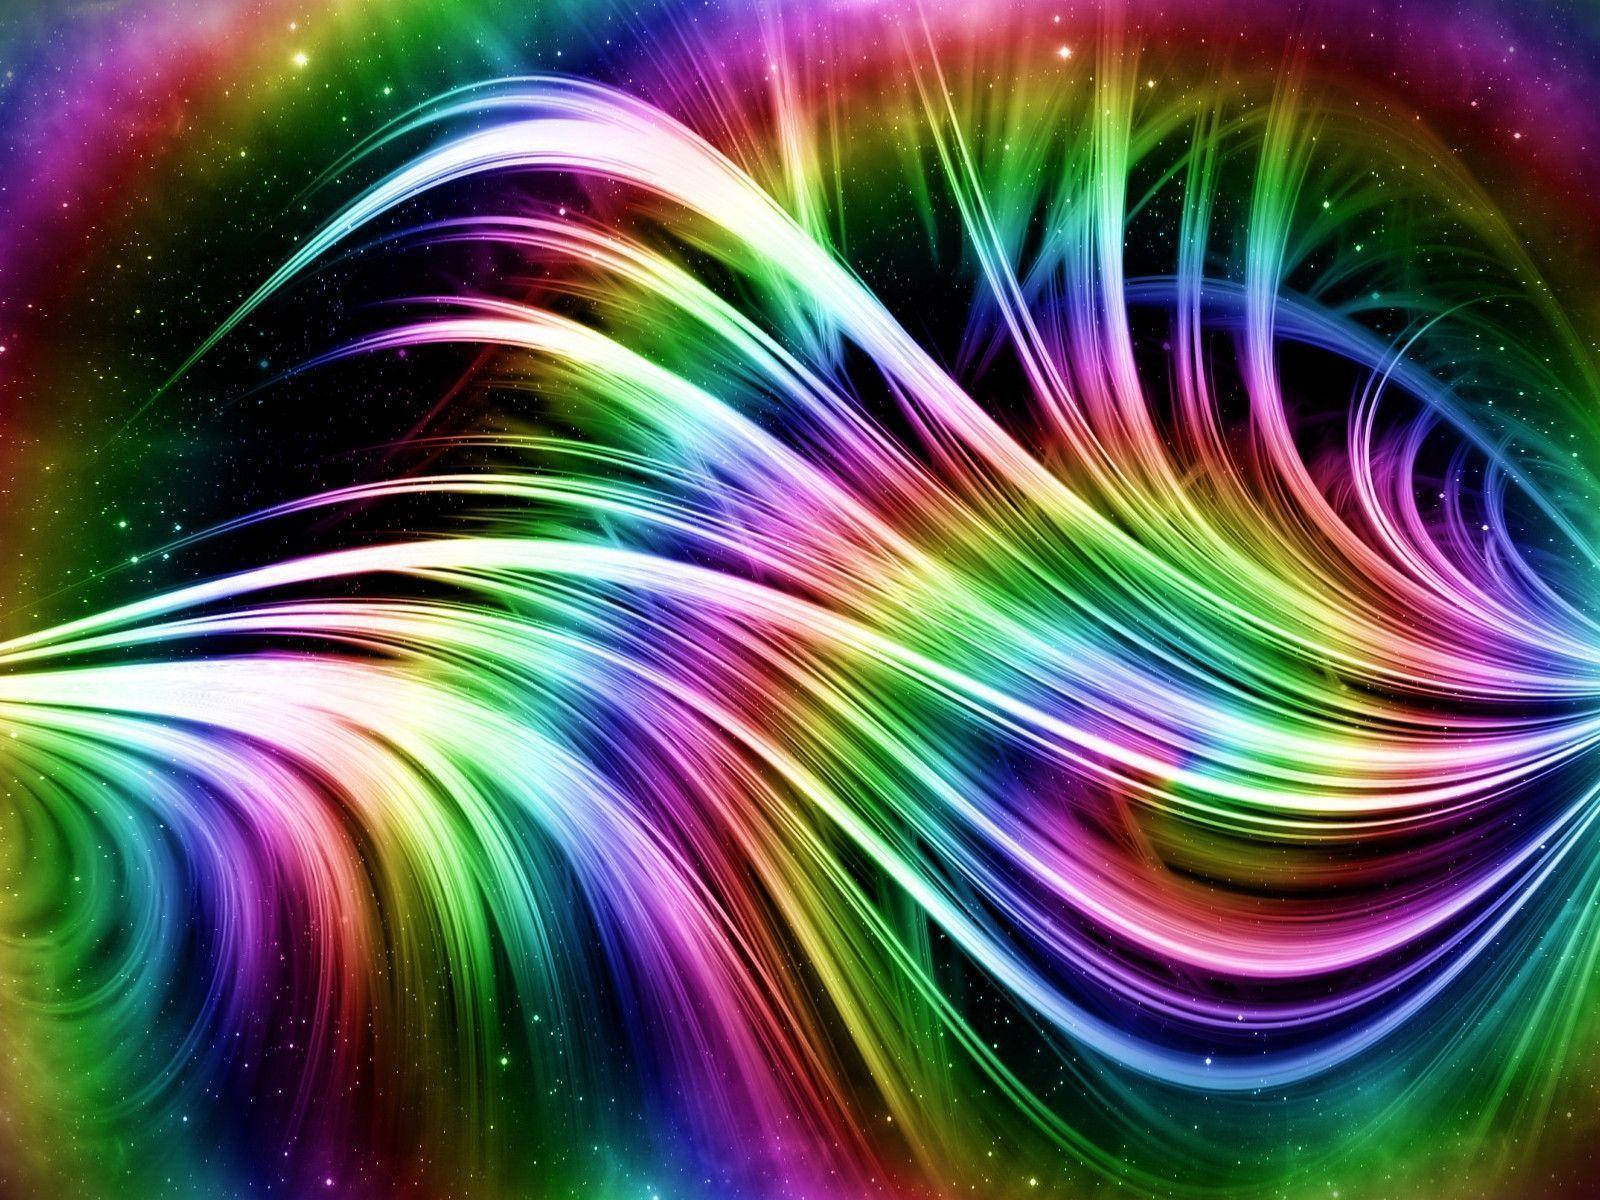 Enjoy The Vibrancy Of Cool, Colorful Graphics. Background